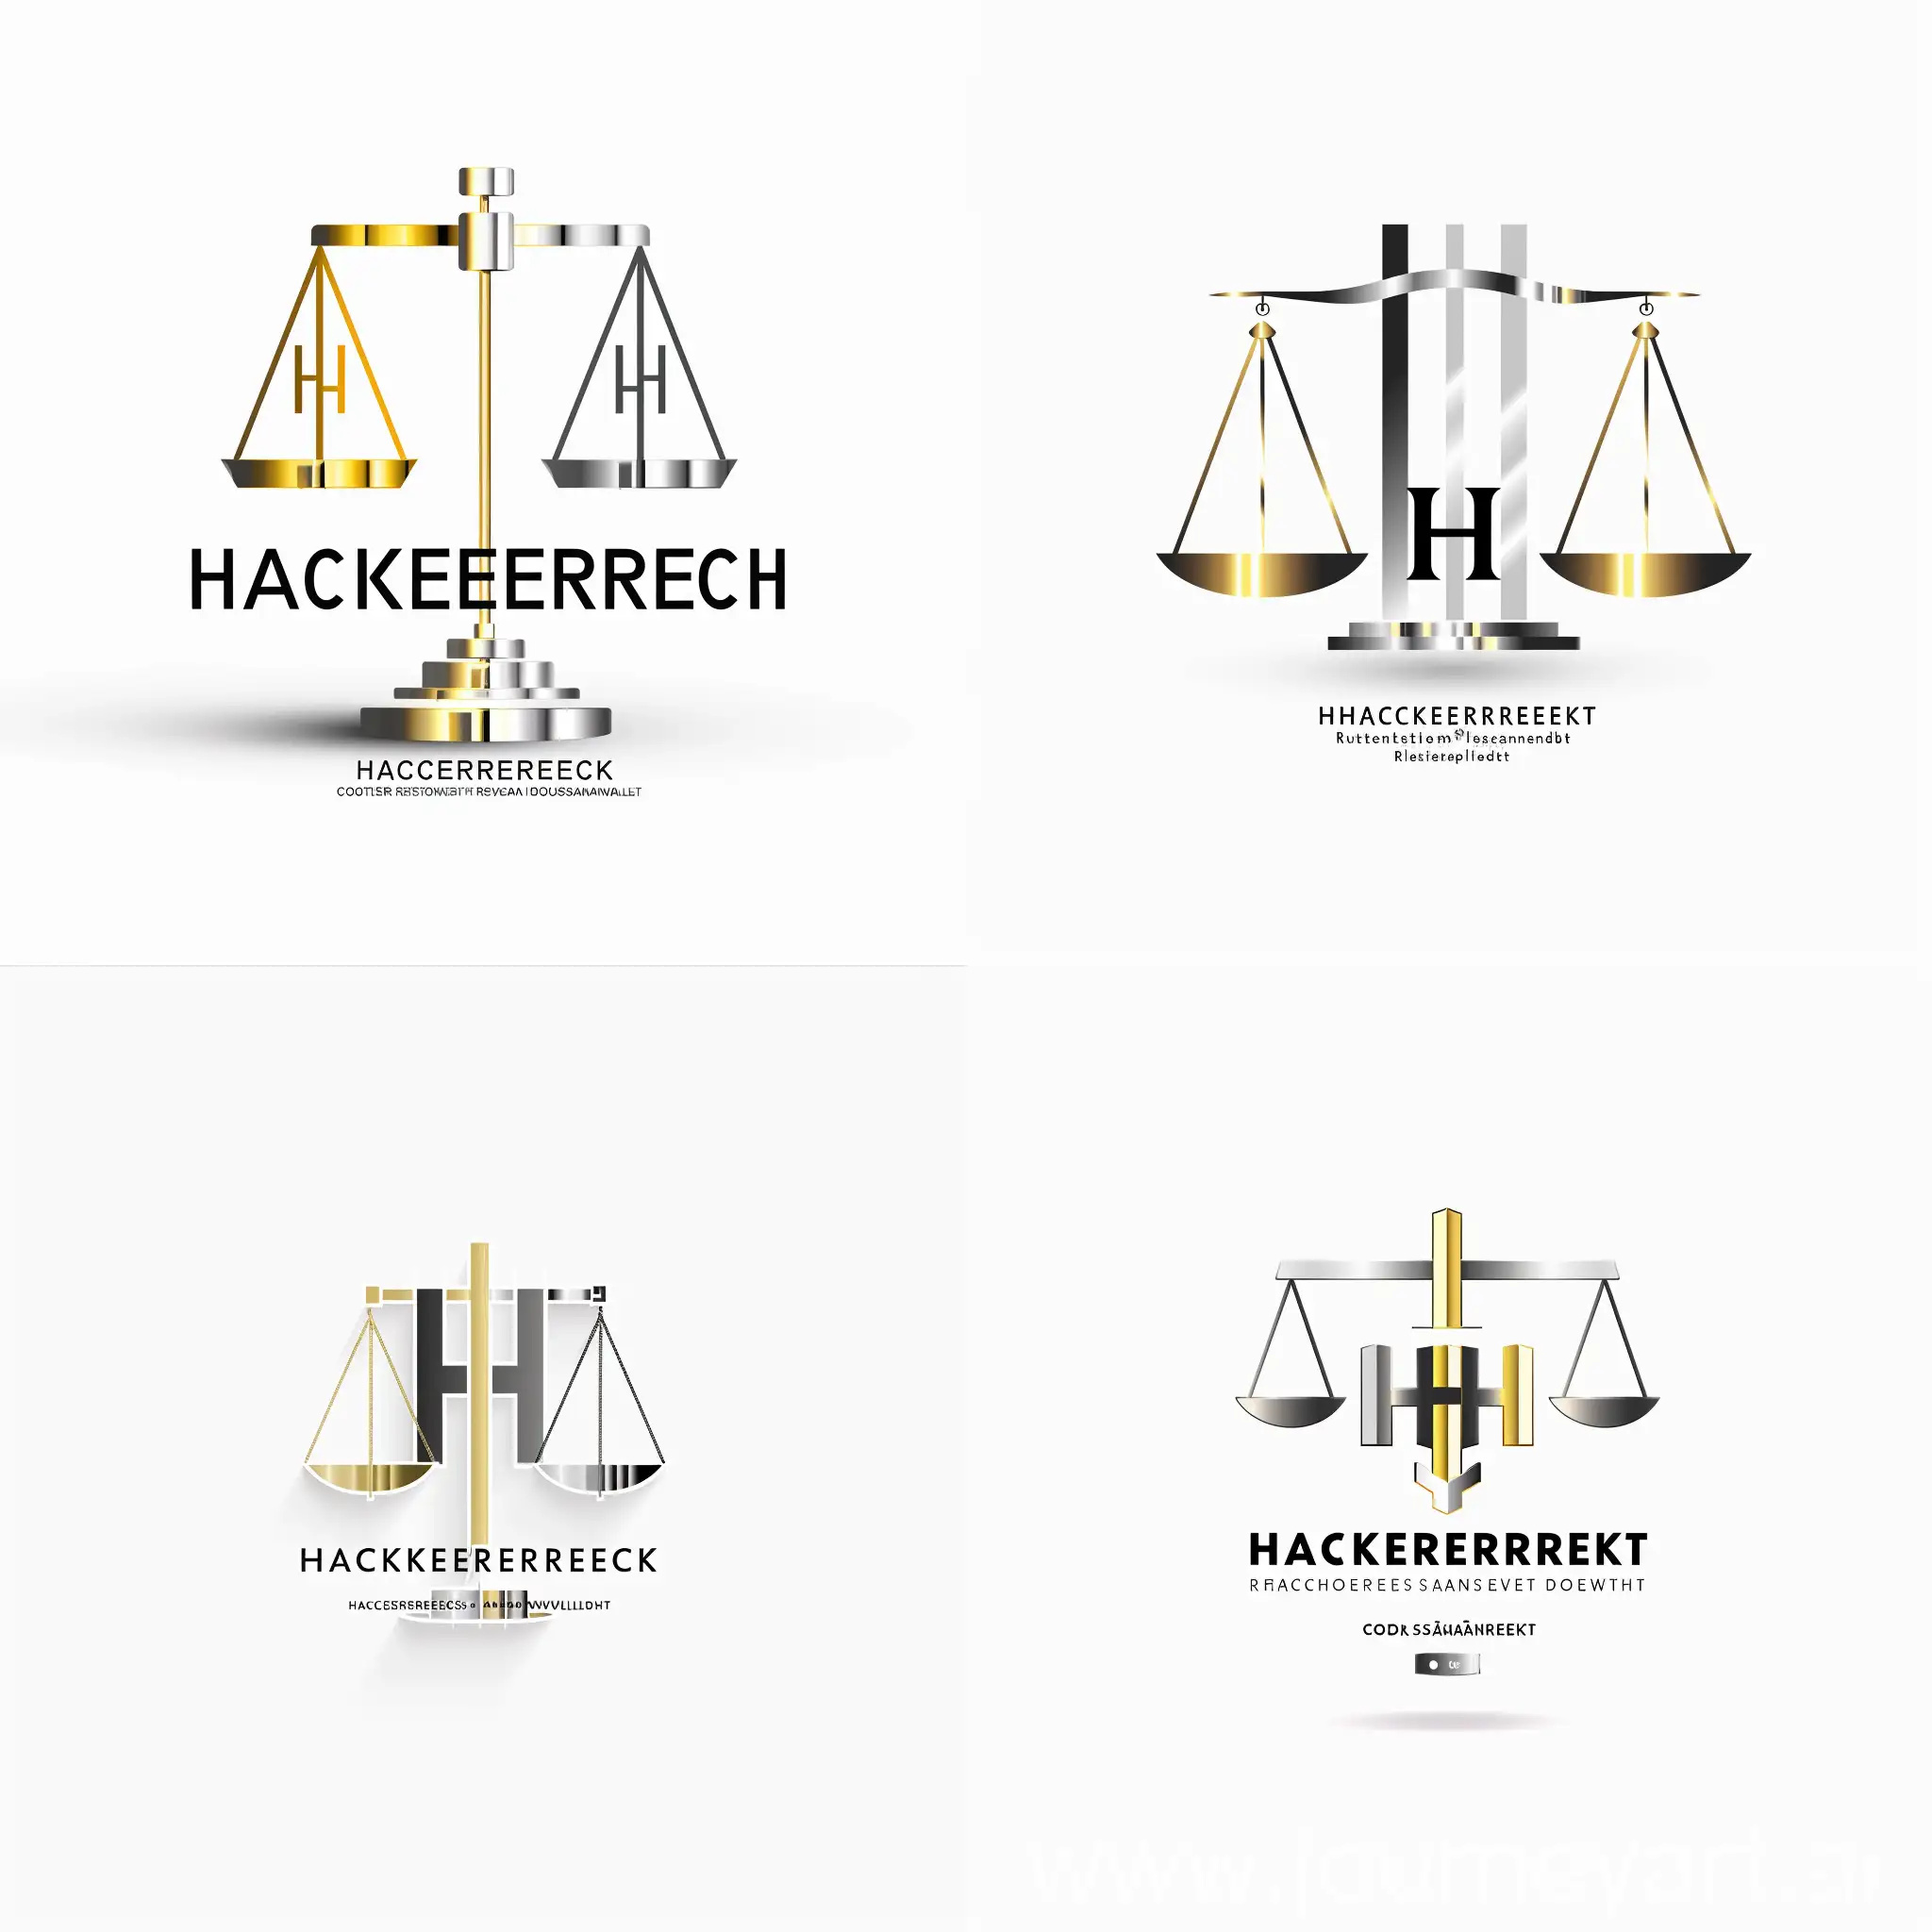 Create a unique logo for a law firm called 'HACKERRECHT' 'Rechtsanwalt',  white background,  (make it in a cool font good to read), 4k, high detail, straight in front centre, golden and silver and black and white, trustworthy, scale, 'HH', business style, simple rectangular parts, vector, Office seriousness, symmetrical, Courthouse, paragraph, Code of Laws, representative, elegant design, formal look, lawyer, subtle frames, Brutalist architecture, legal code, classic elegance, open, rationalistic, futuristic, trend-setting